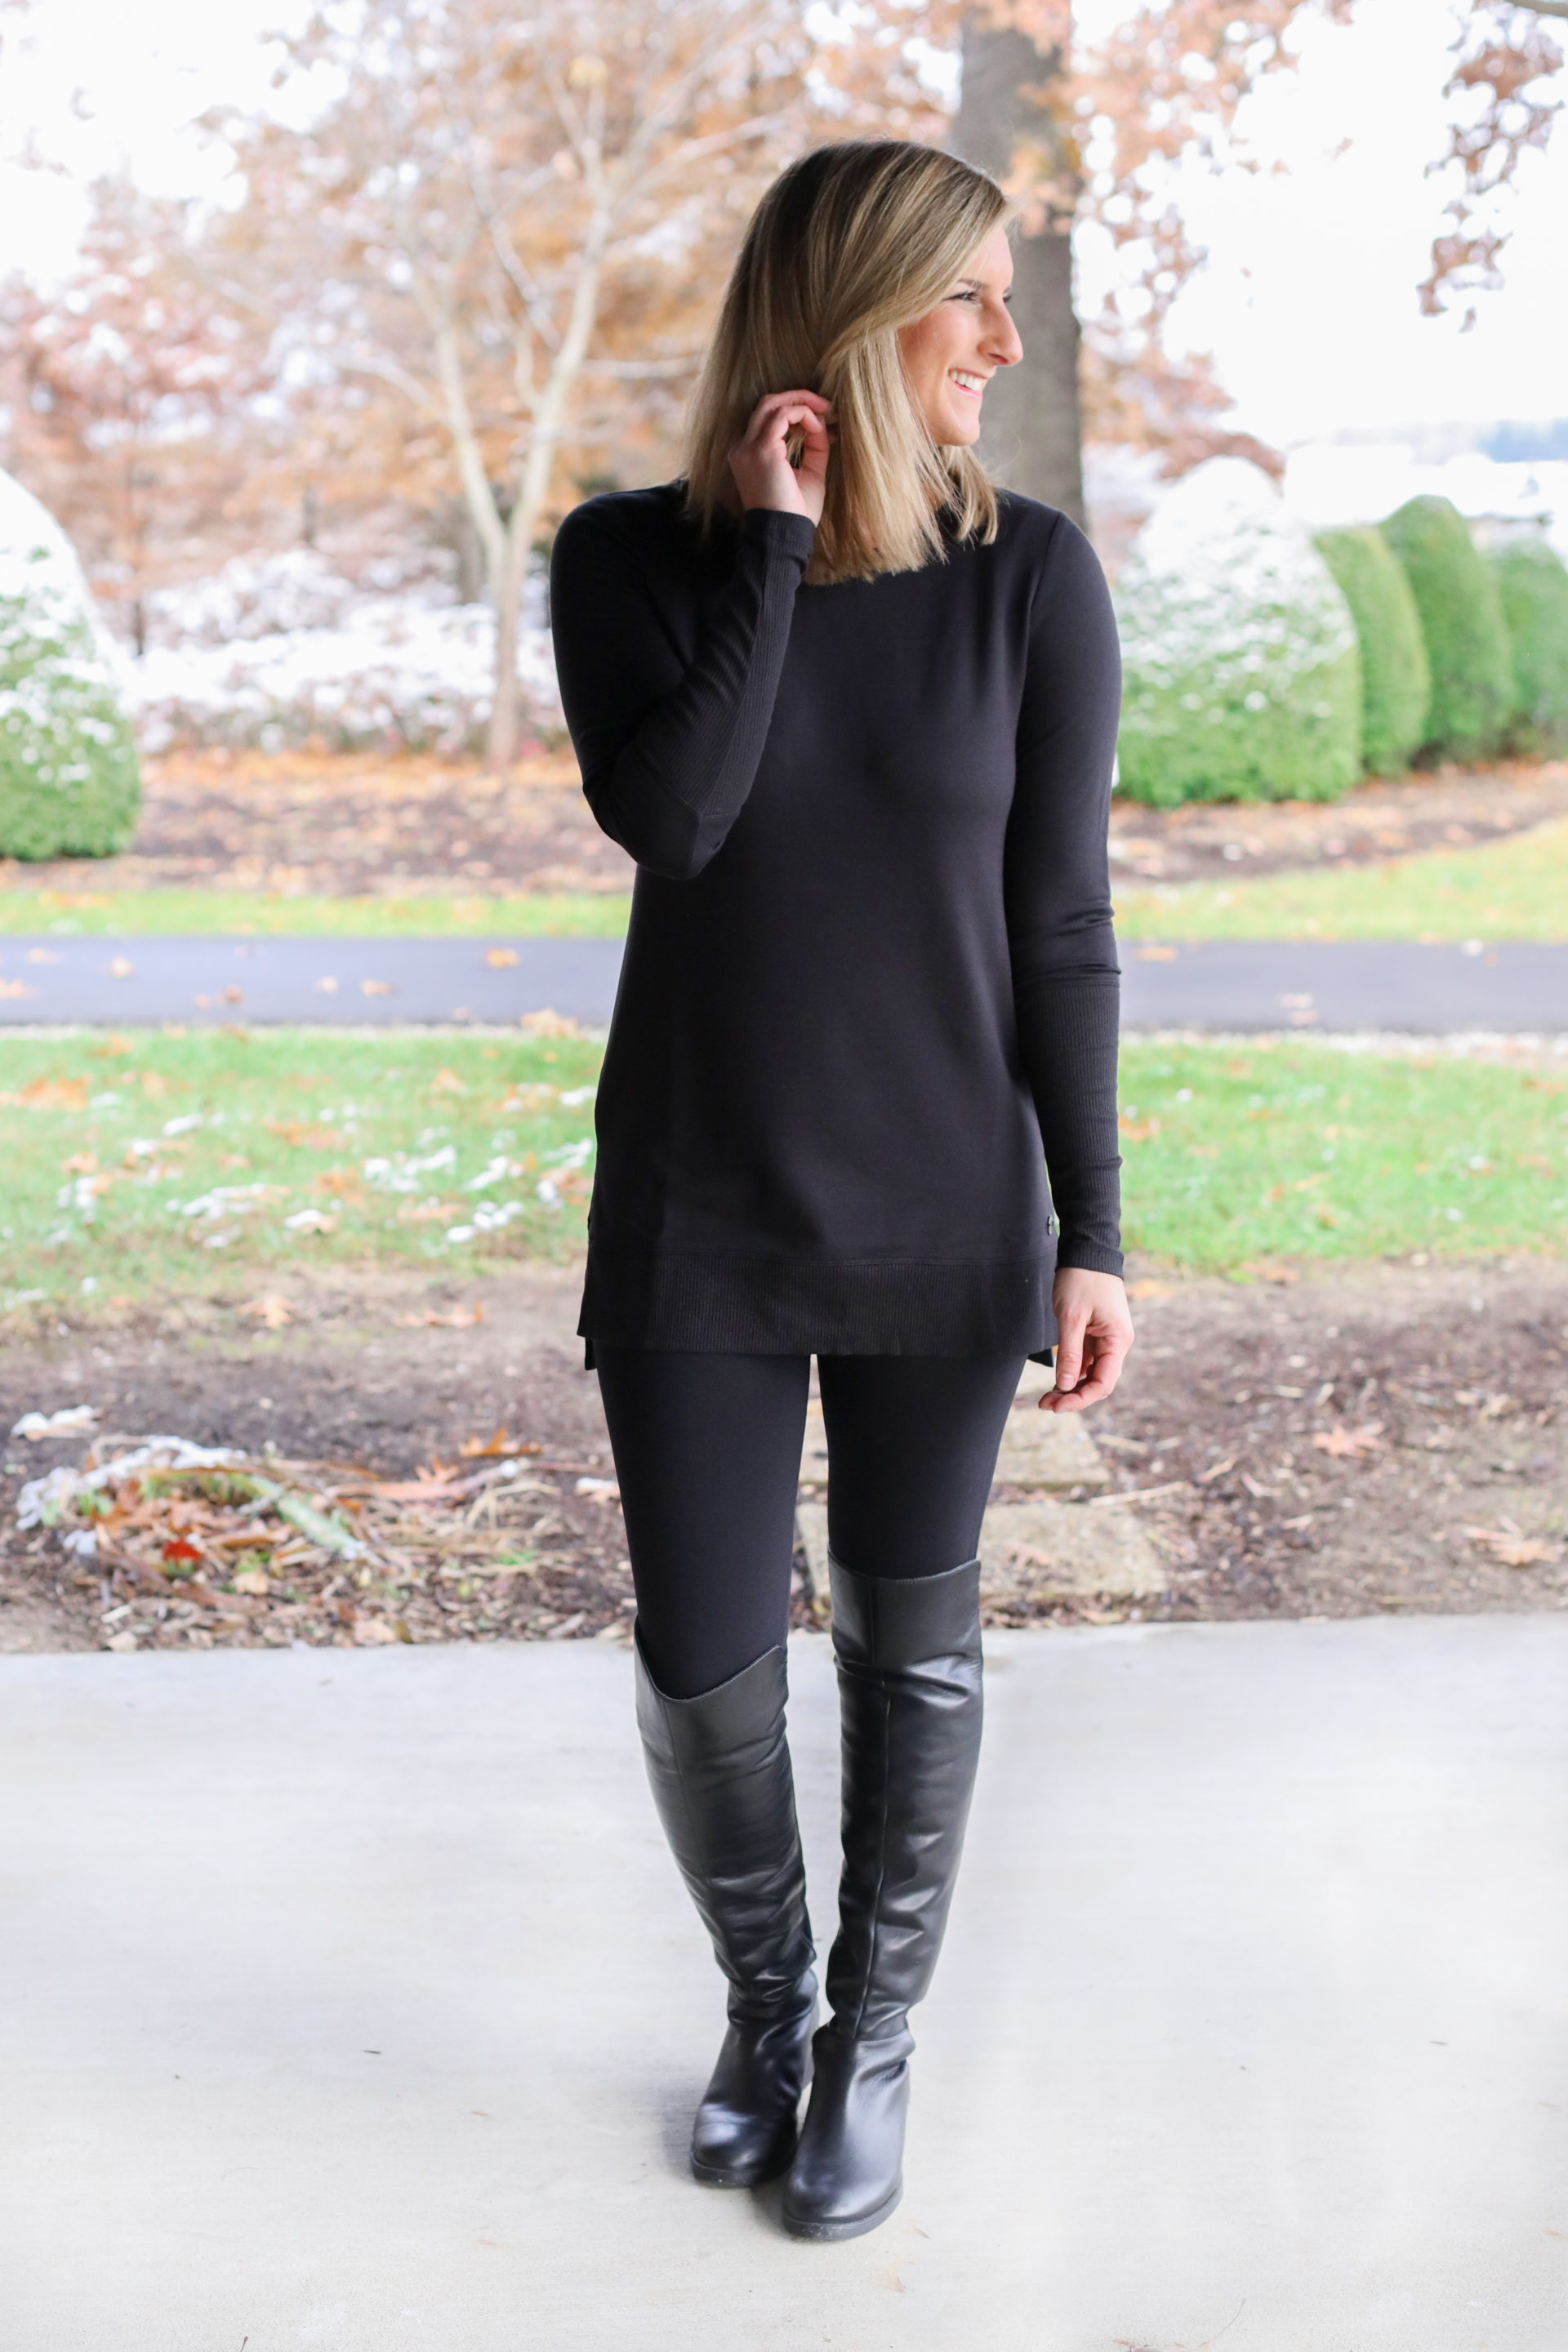 Styling Leggings and Tunics - TheMomInStyle